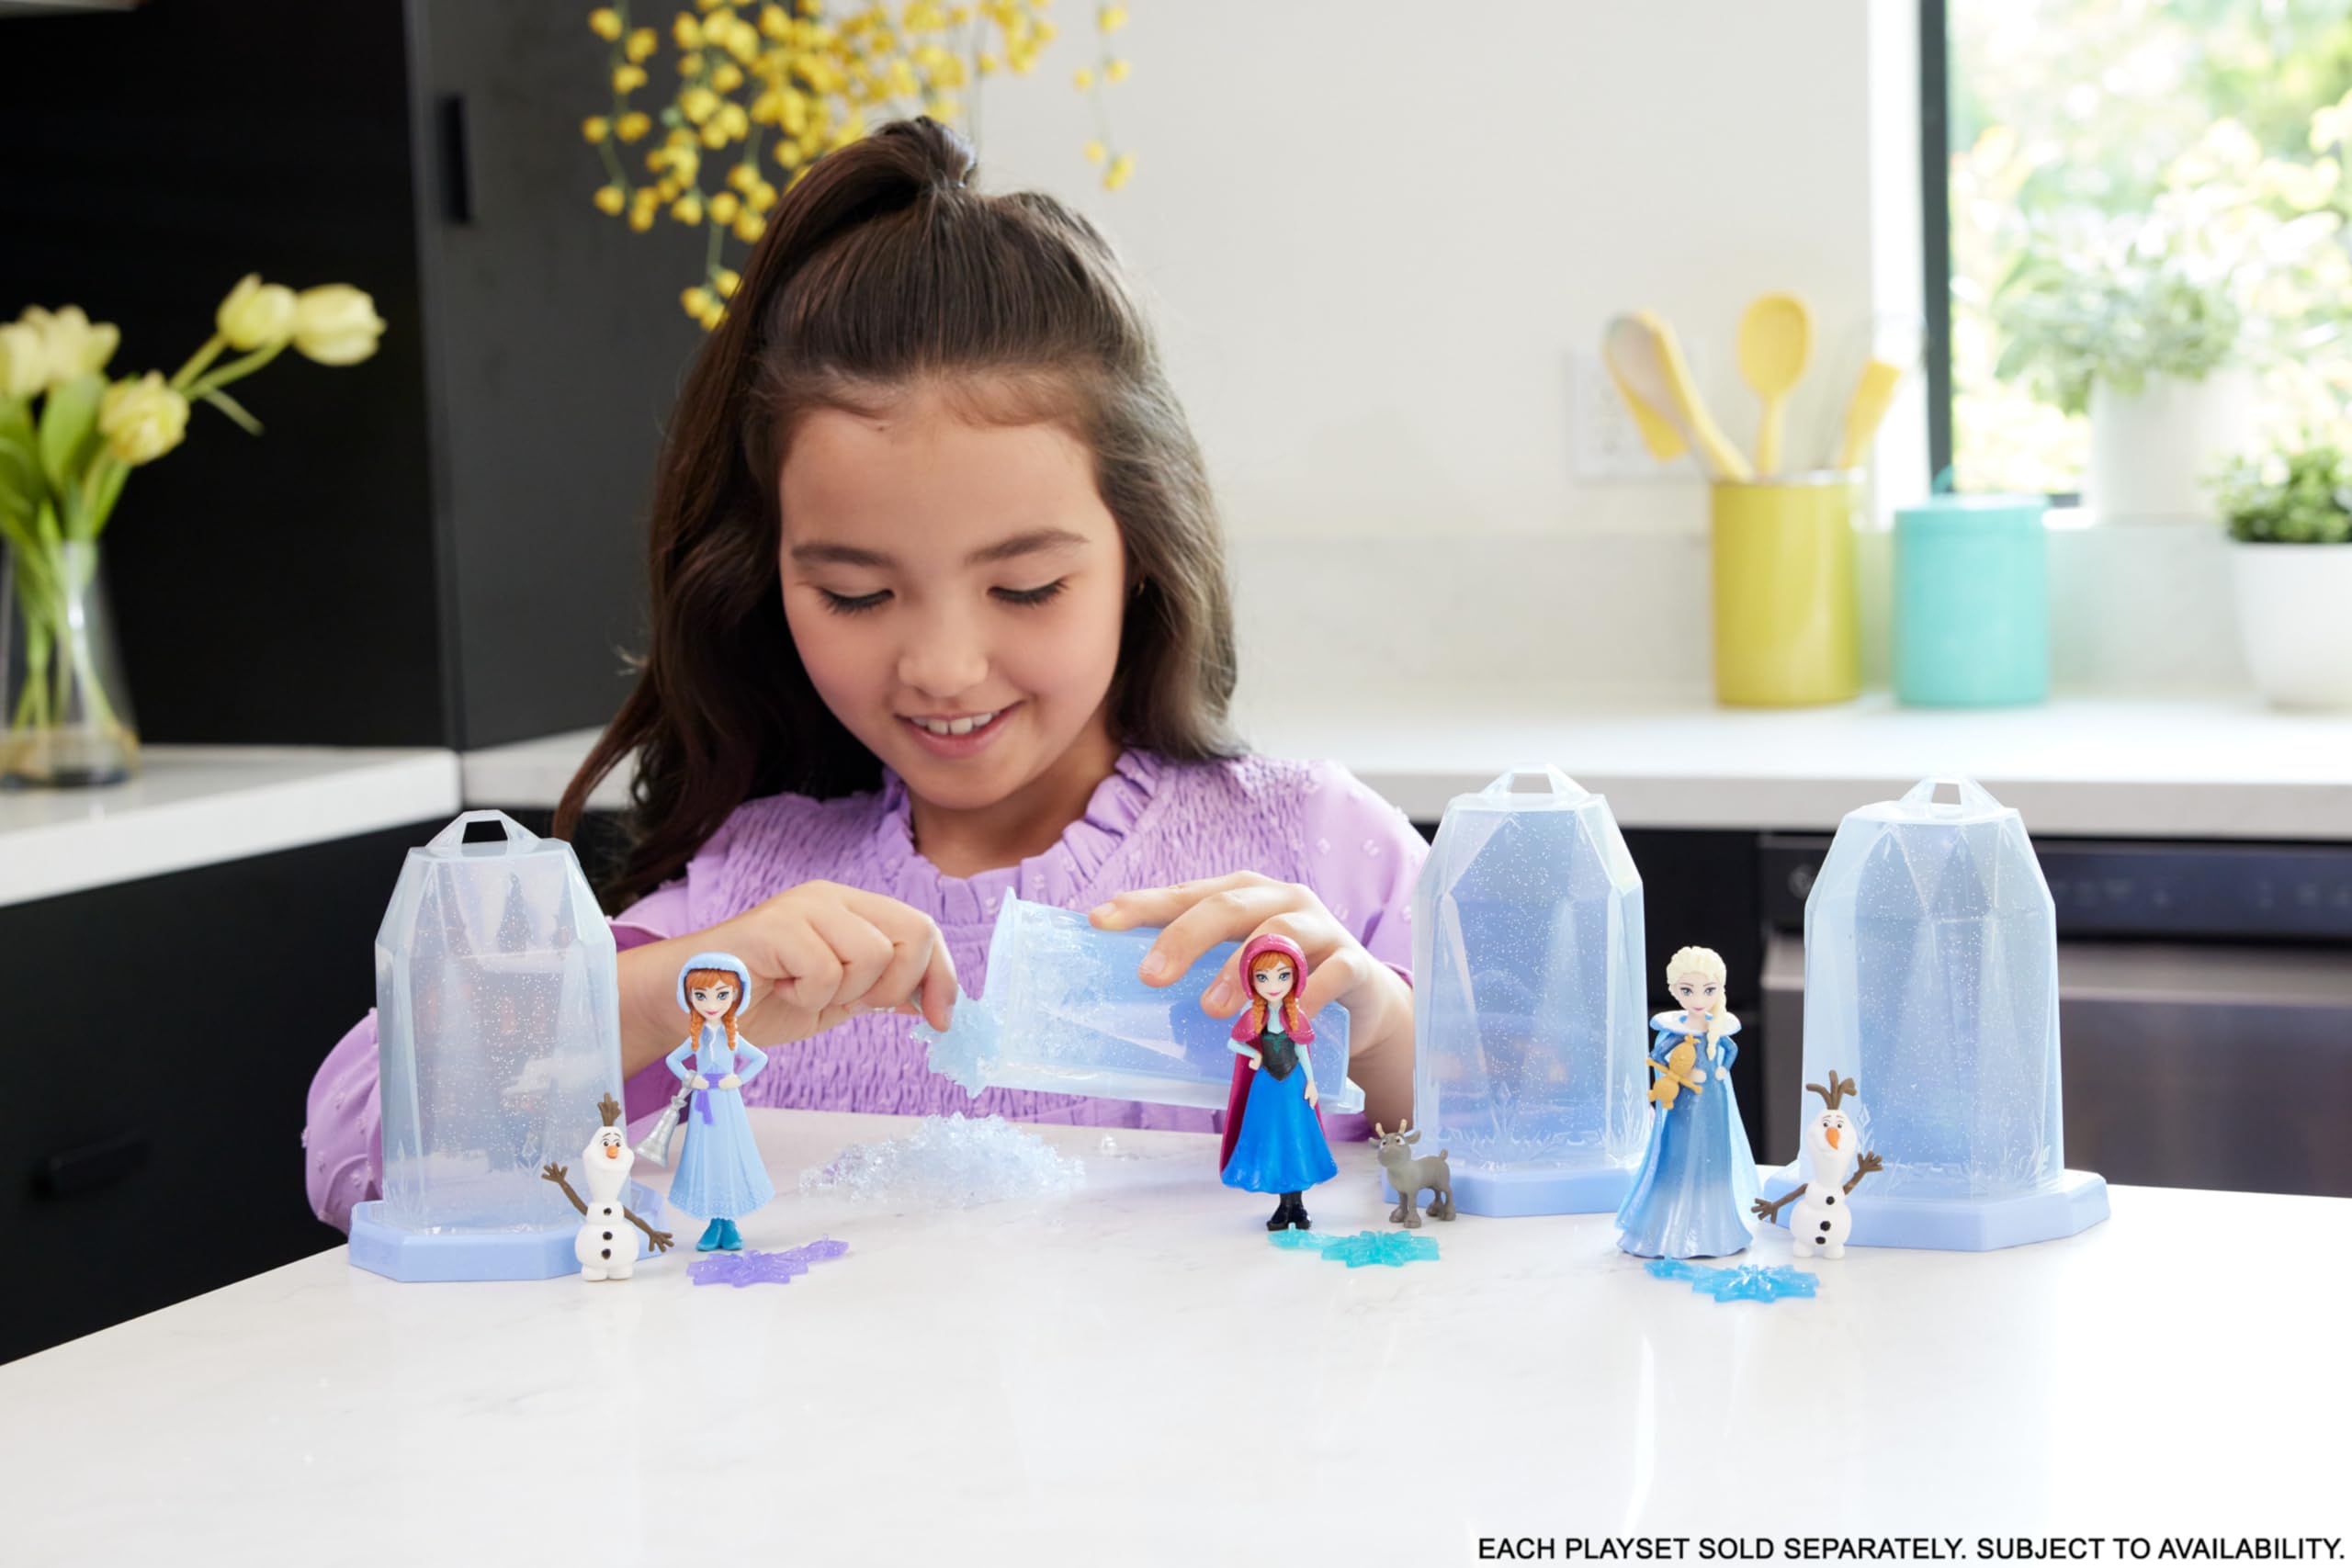 Mattel Disney Frozen Small Doll Ice Reveal with Squishy Ice Gel and 6 Surprises Including Character Friend & Play Pieces (Dolls May Vary)